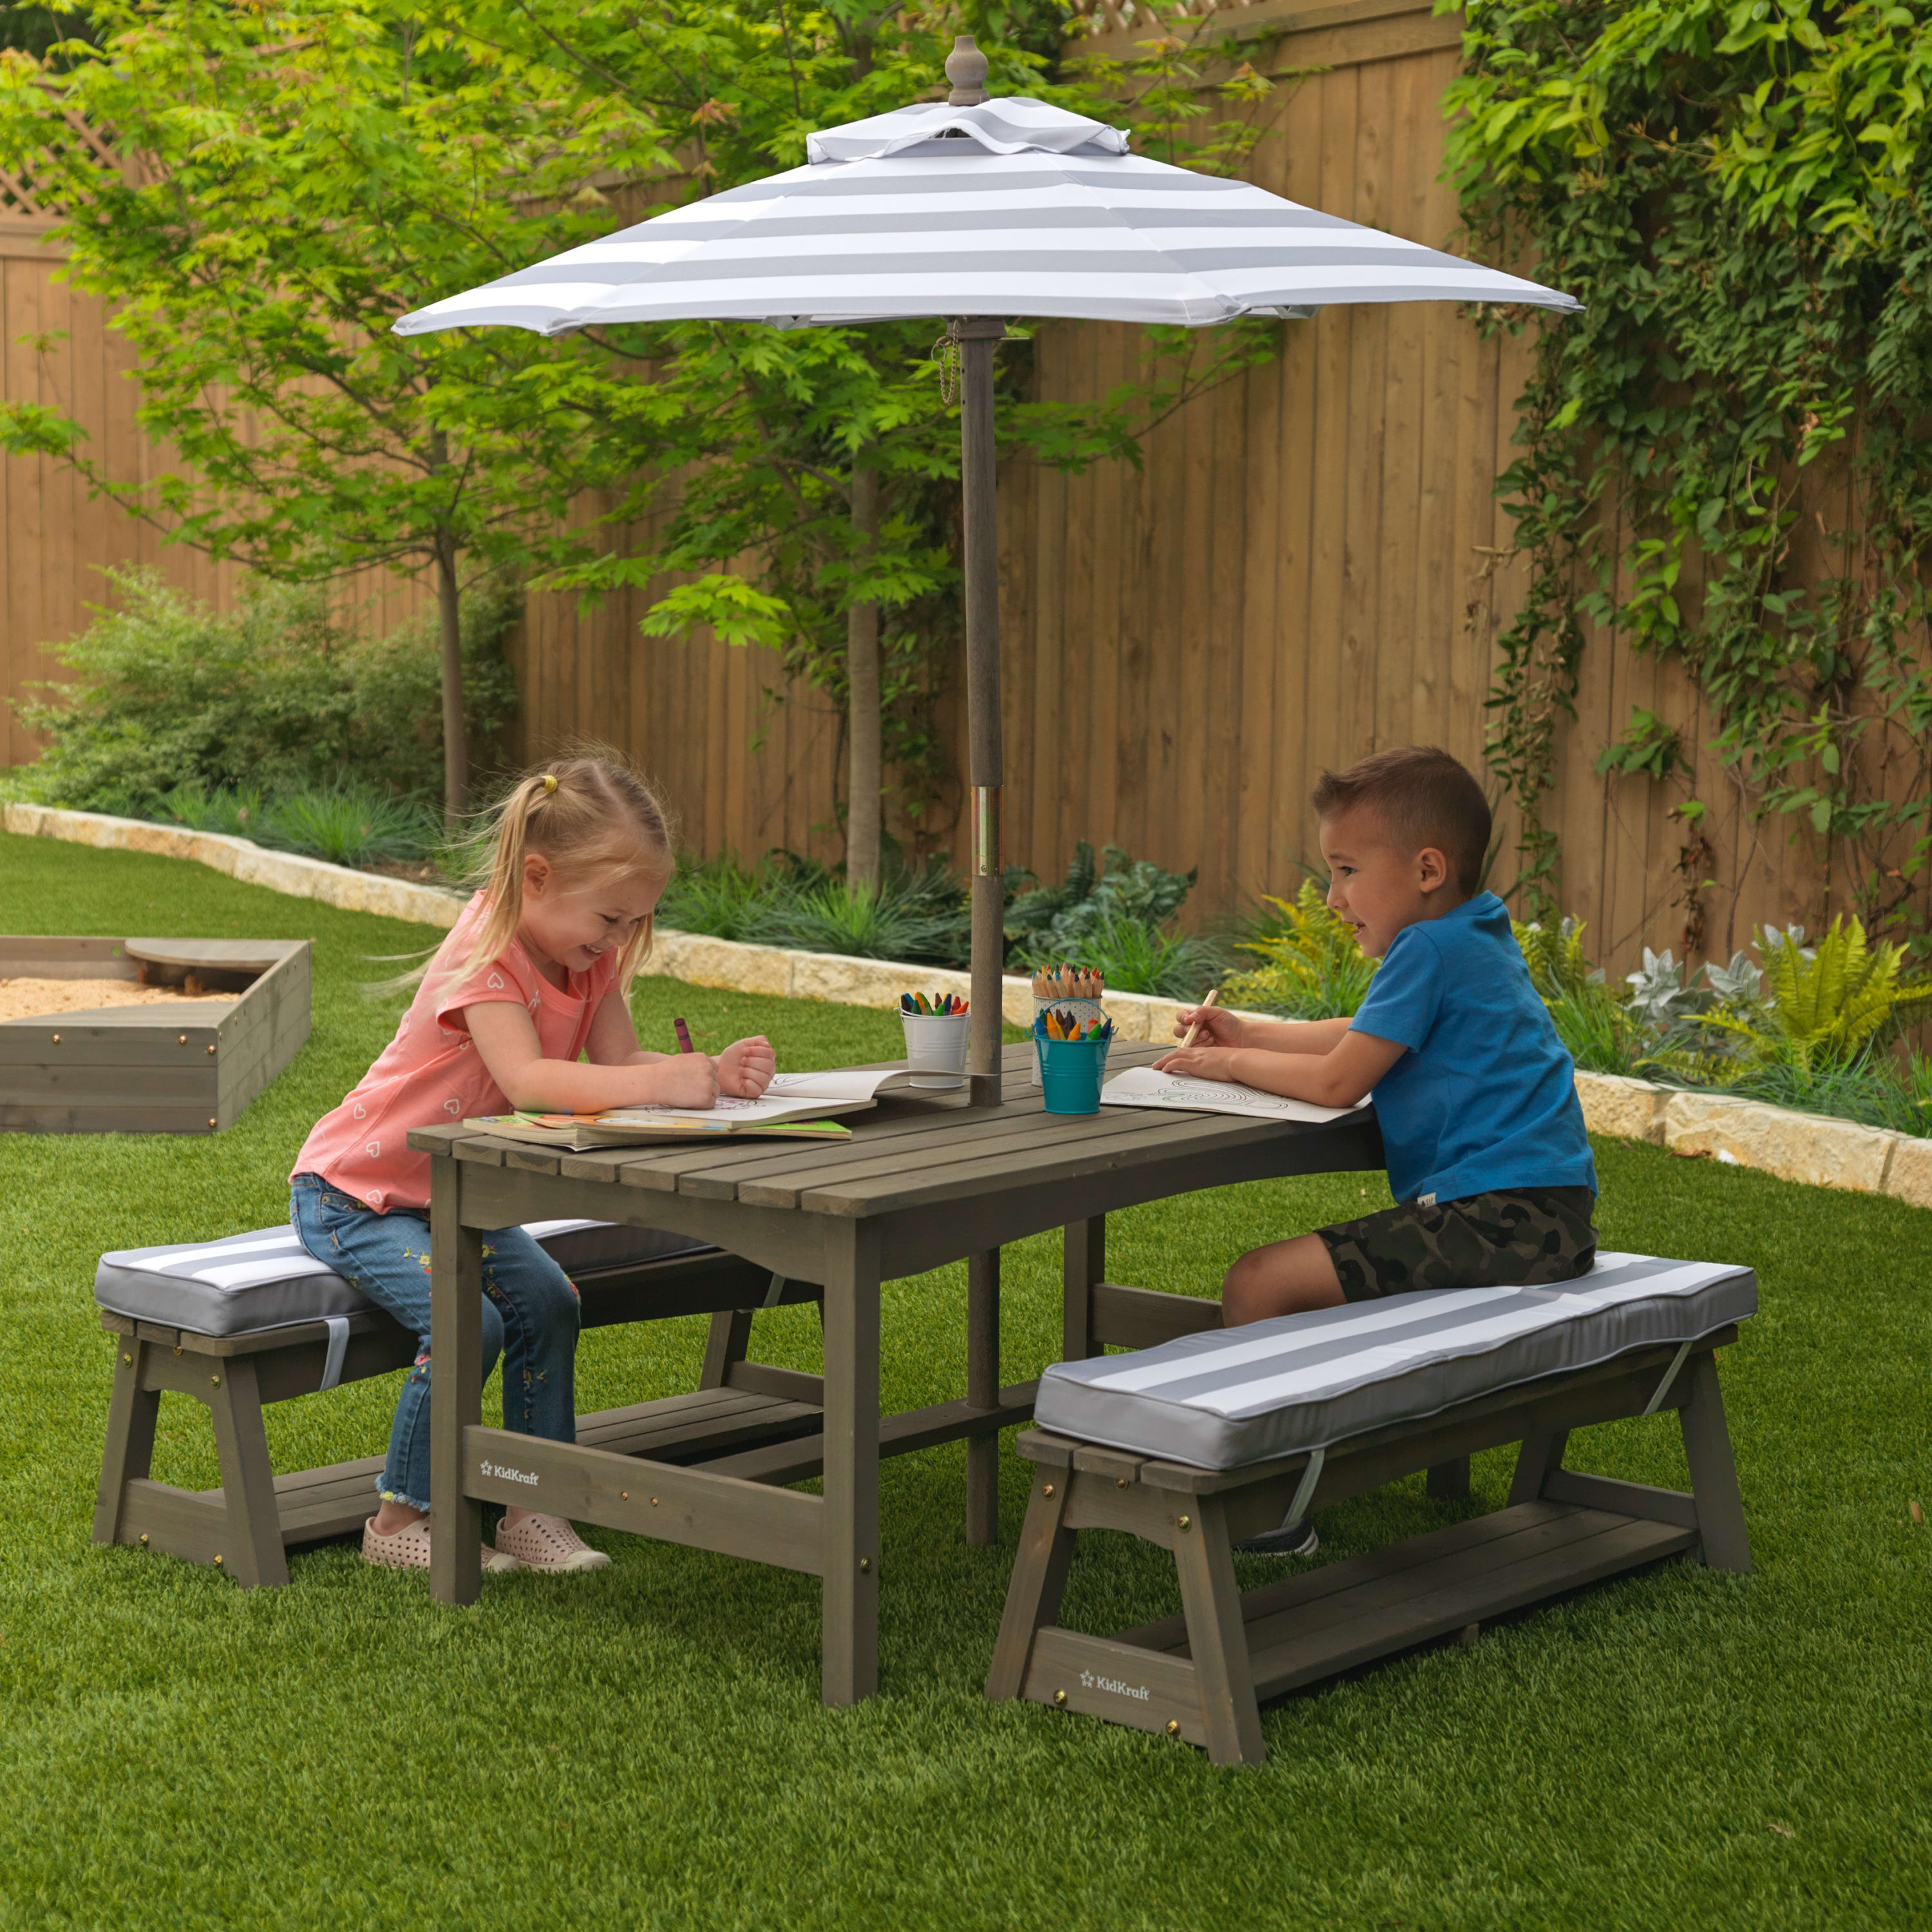 KidKraft Outdoor Table & Bench Set with Cushions and Umbrella, Gray and White Stripes, For Ages 3+ - image 3 of 9